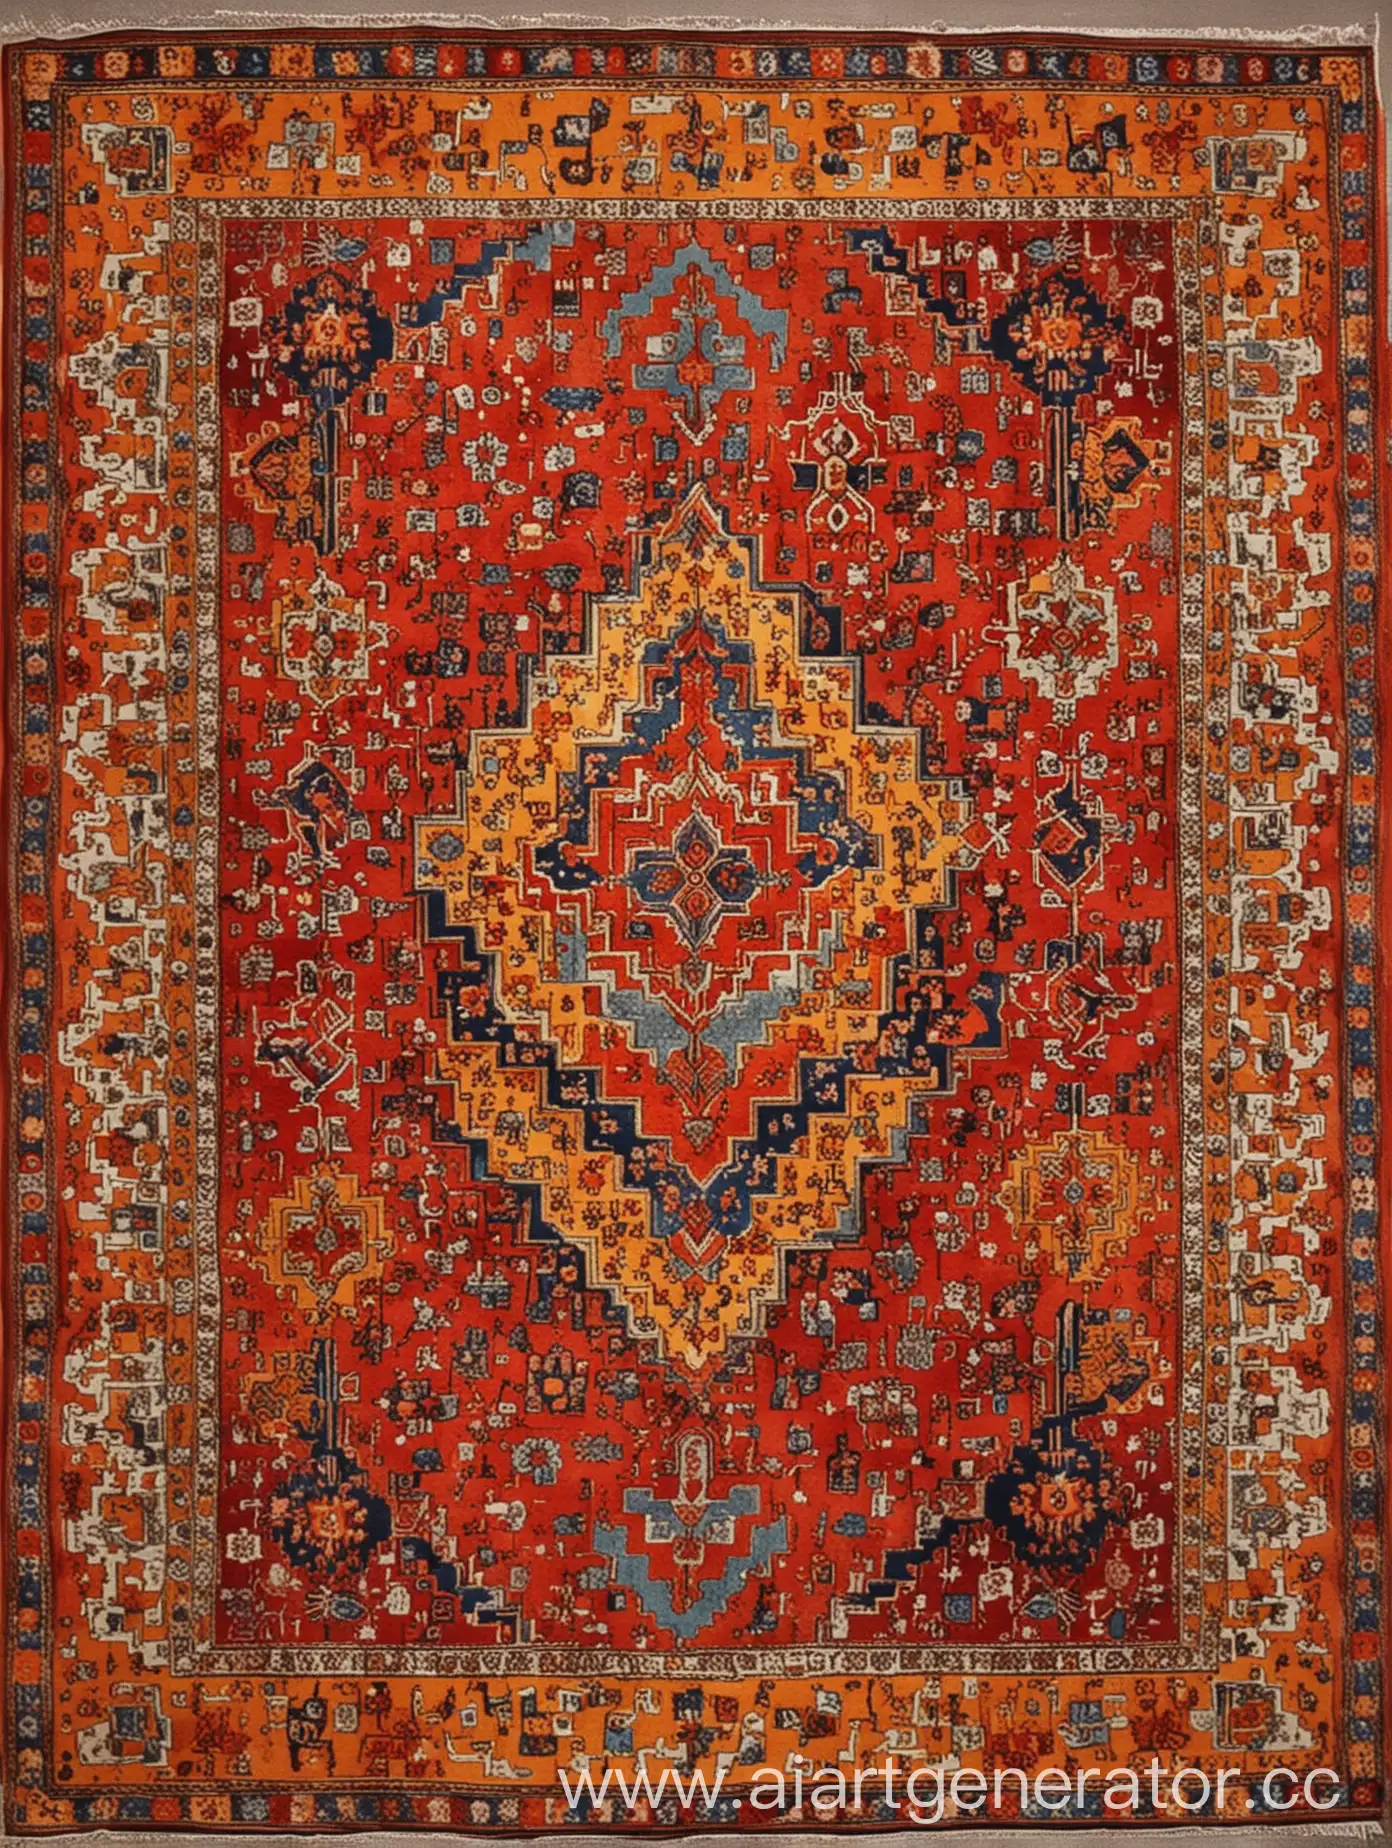 Colorful-Armenian-Carpet-with-Red-Yellow-and-Orange-Hues